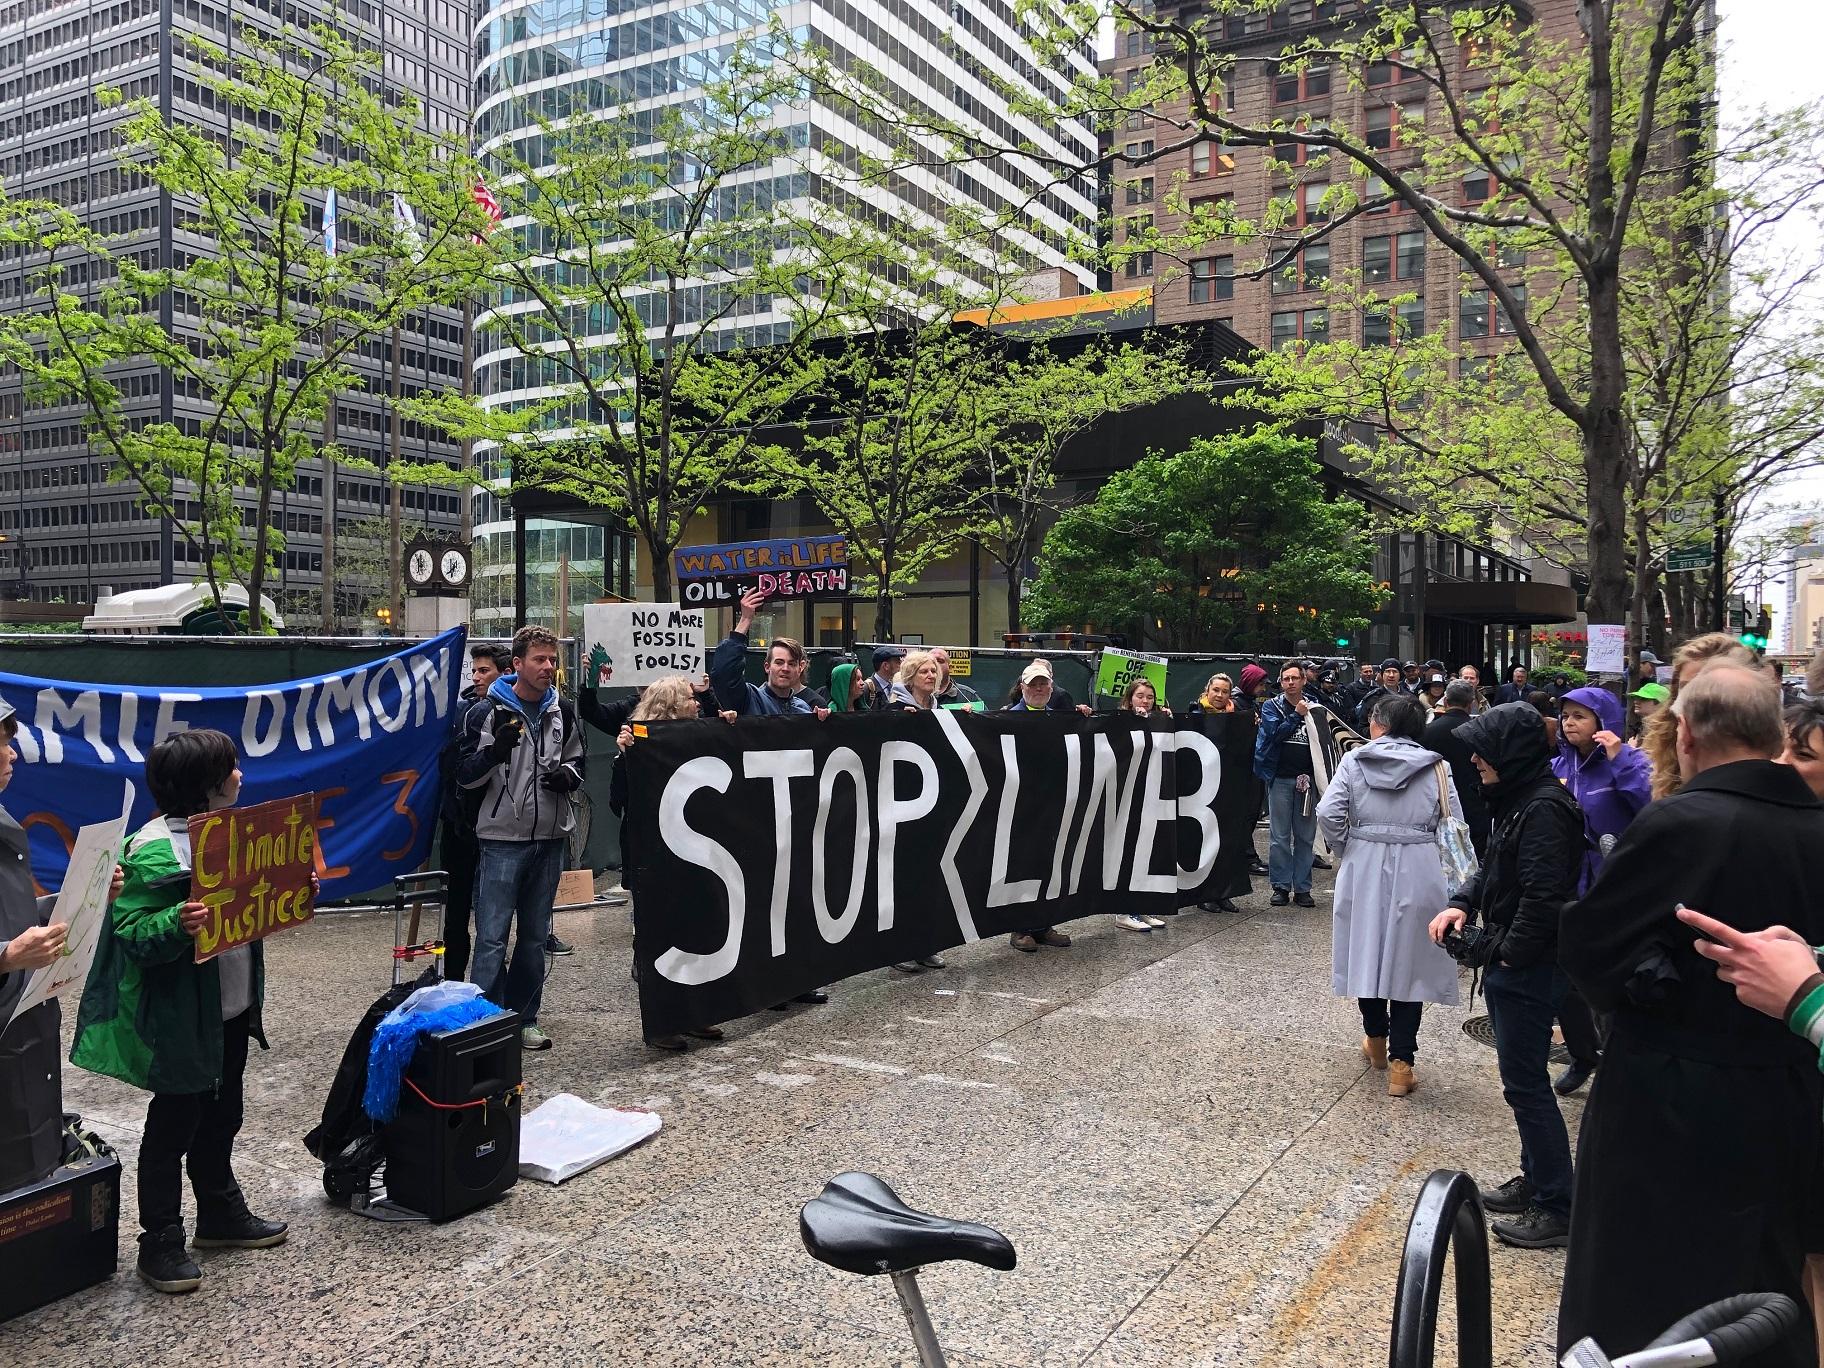 Protesters demonstrated outside Chase Tower over the bank's financing of the controversial Line 3 tar sands oil pipeline expansion. (Alex Ruppenthal / WTTW News)